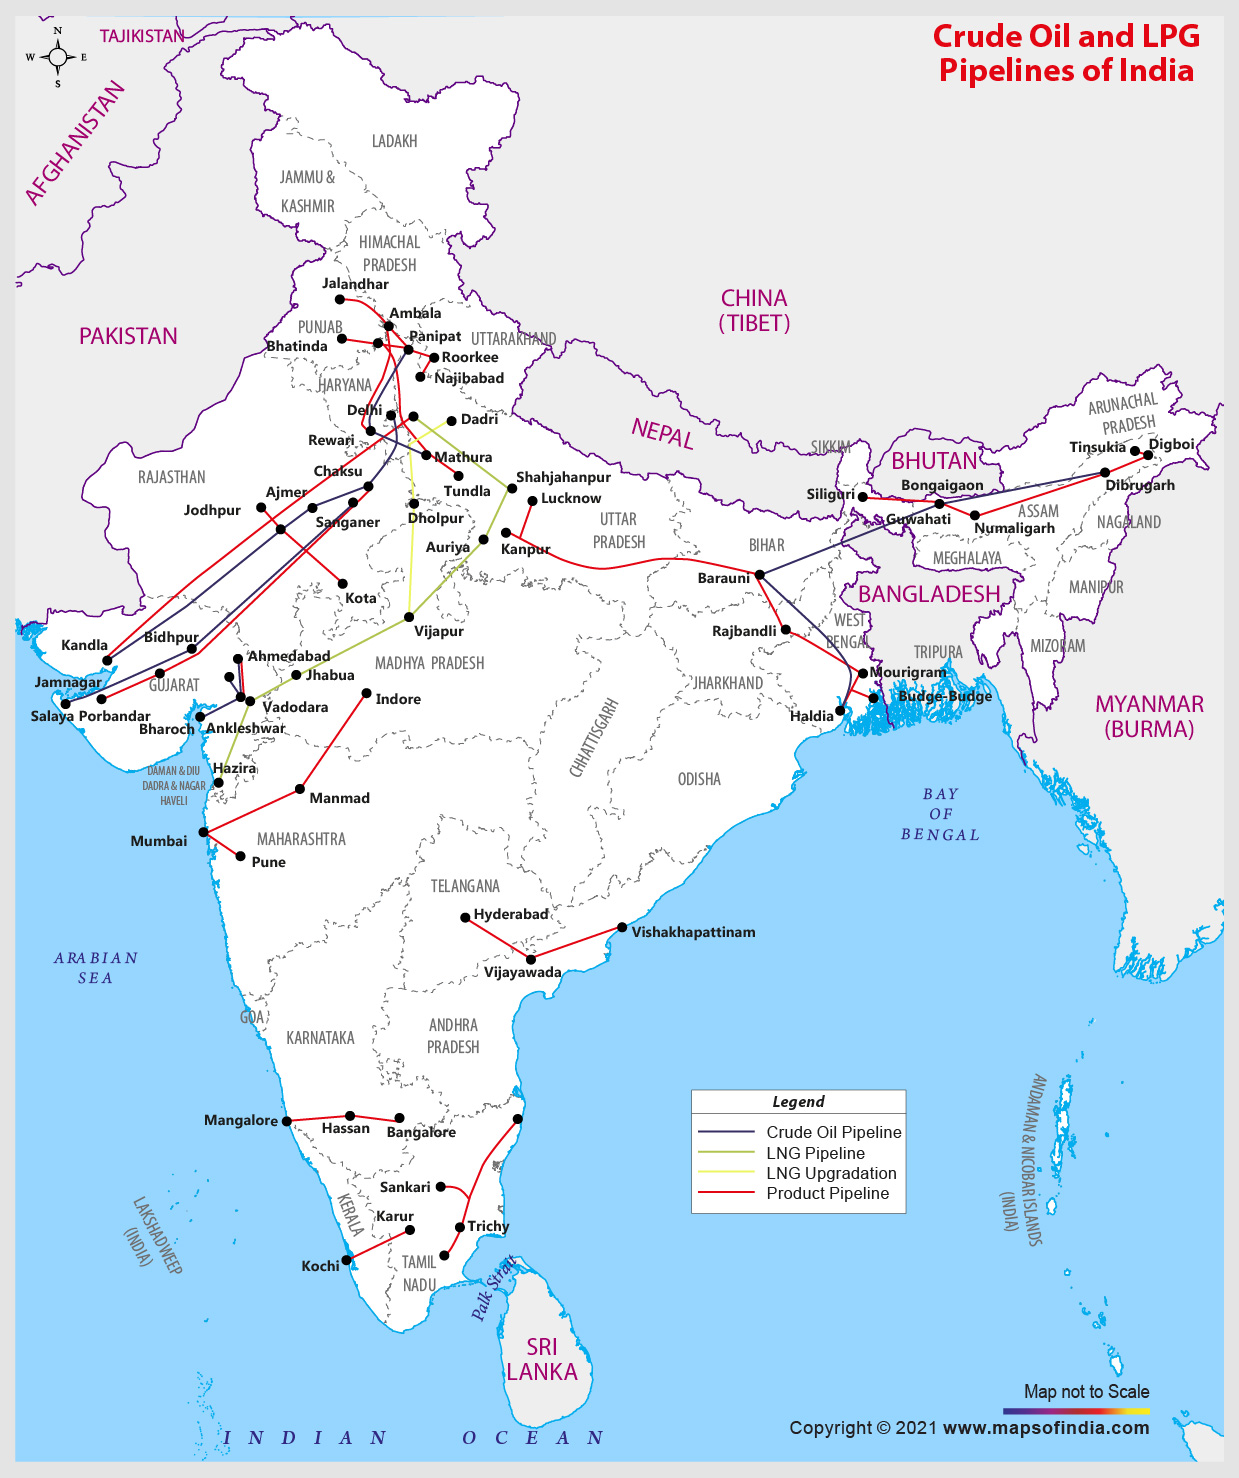 Crude Oil and LPG Pipelines of India